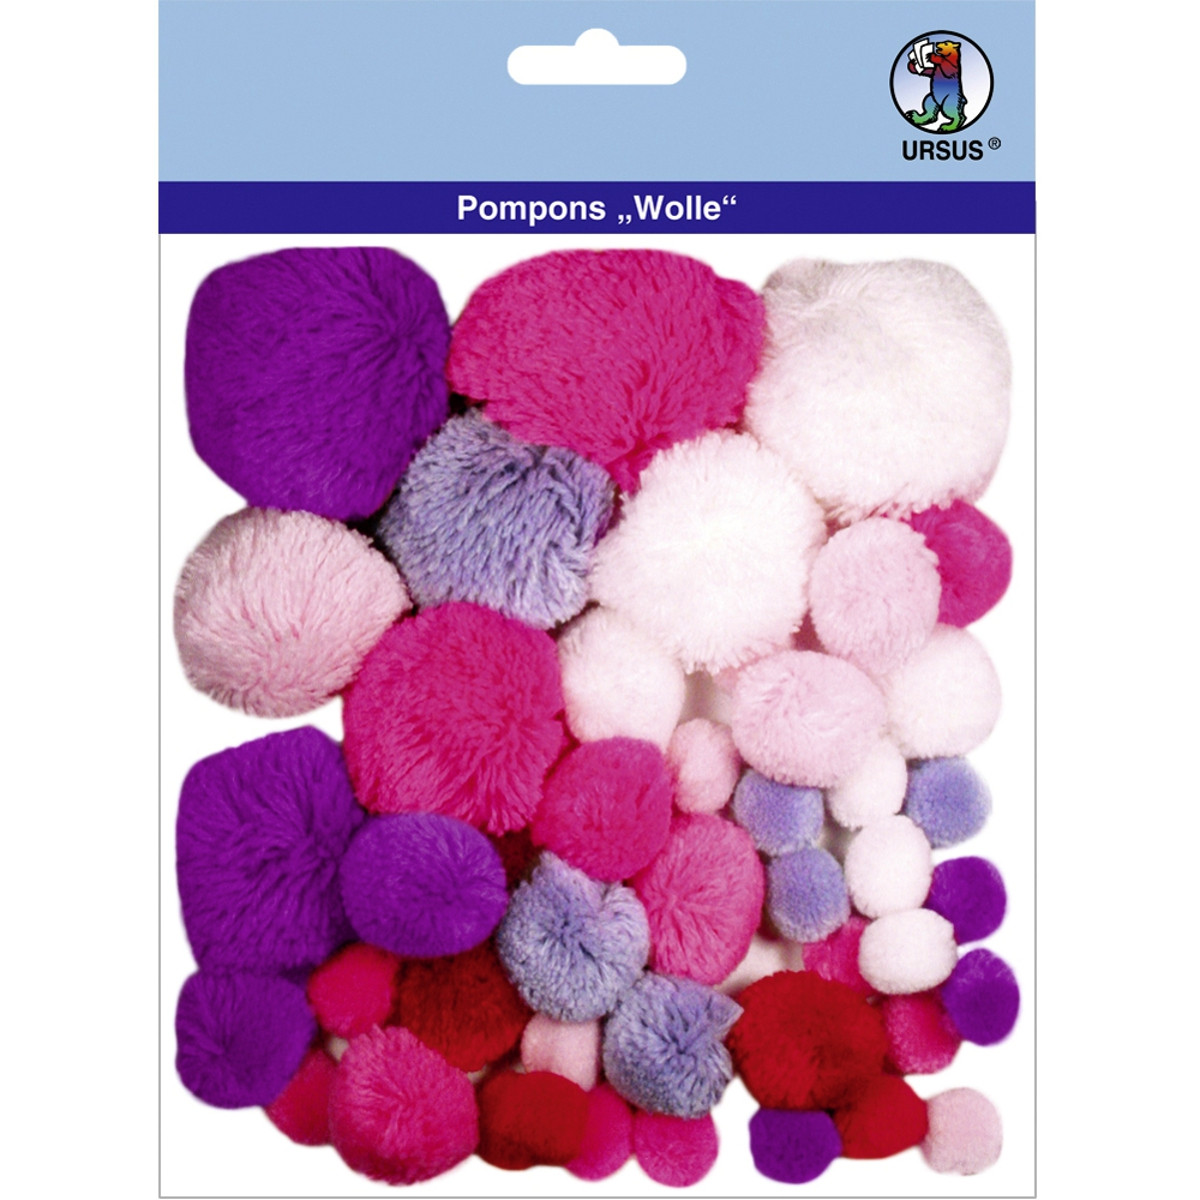 Pompons "Wolle" Mix 3